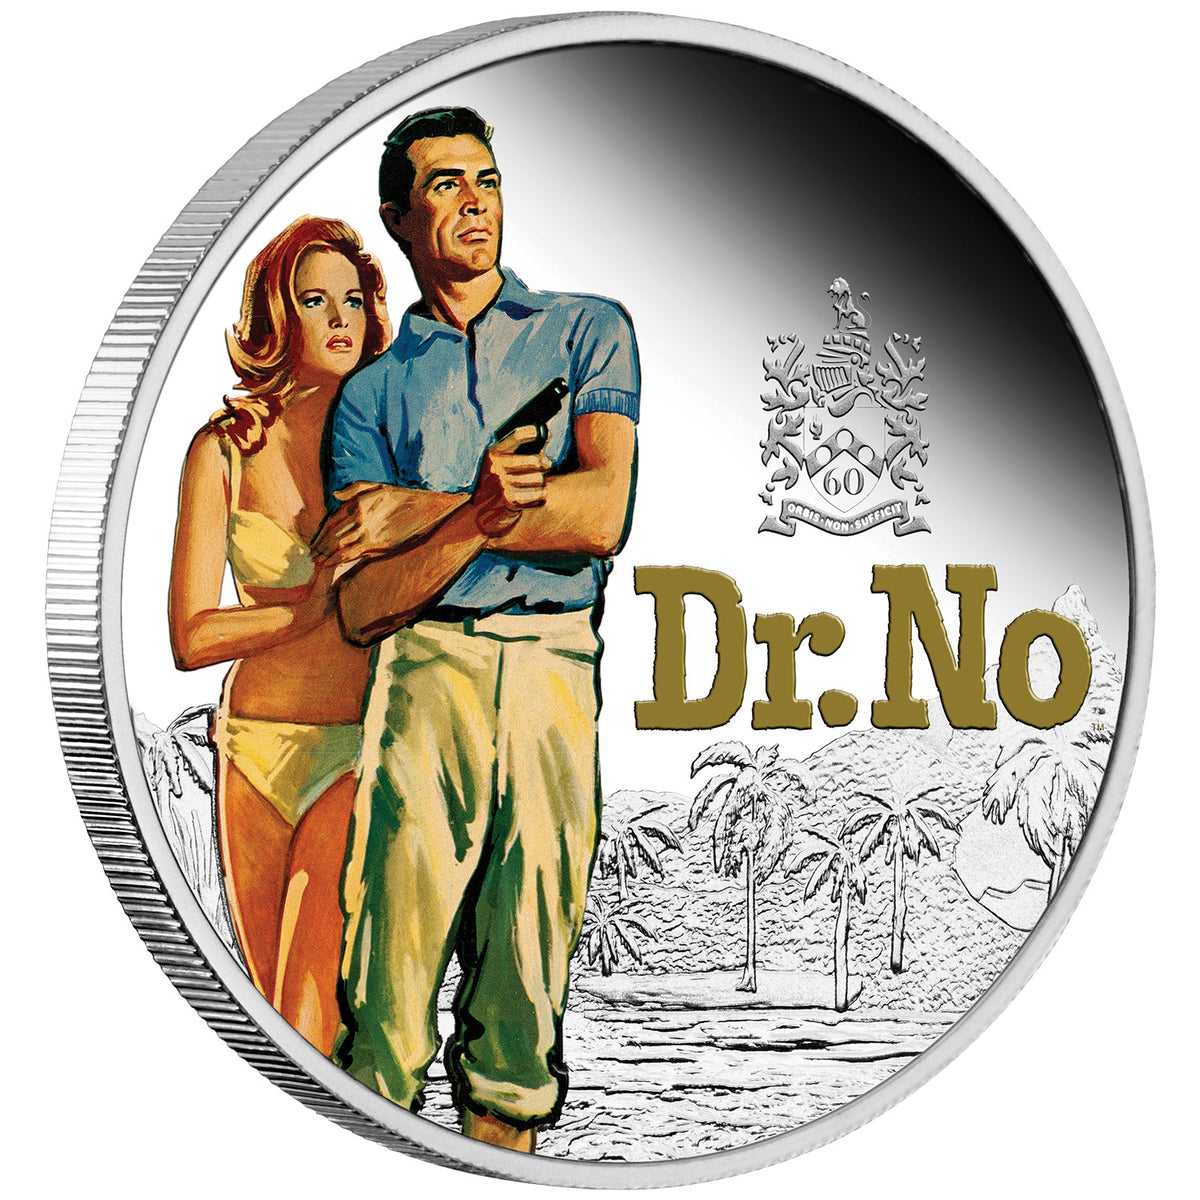 James Bond 1oz Silver Proof Coloured Coin - Dr. No 60th Anniversary Numbered Edition - By The Perth Mint